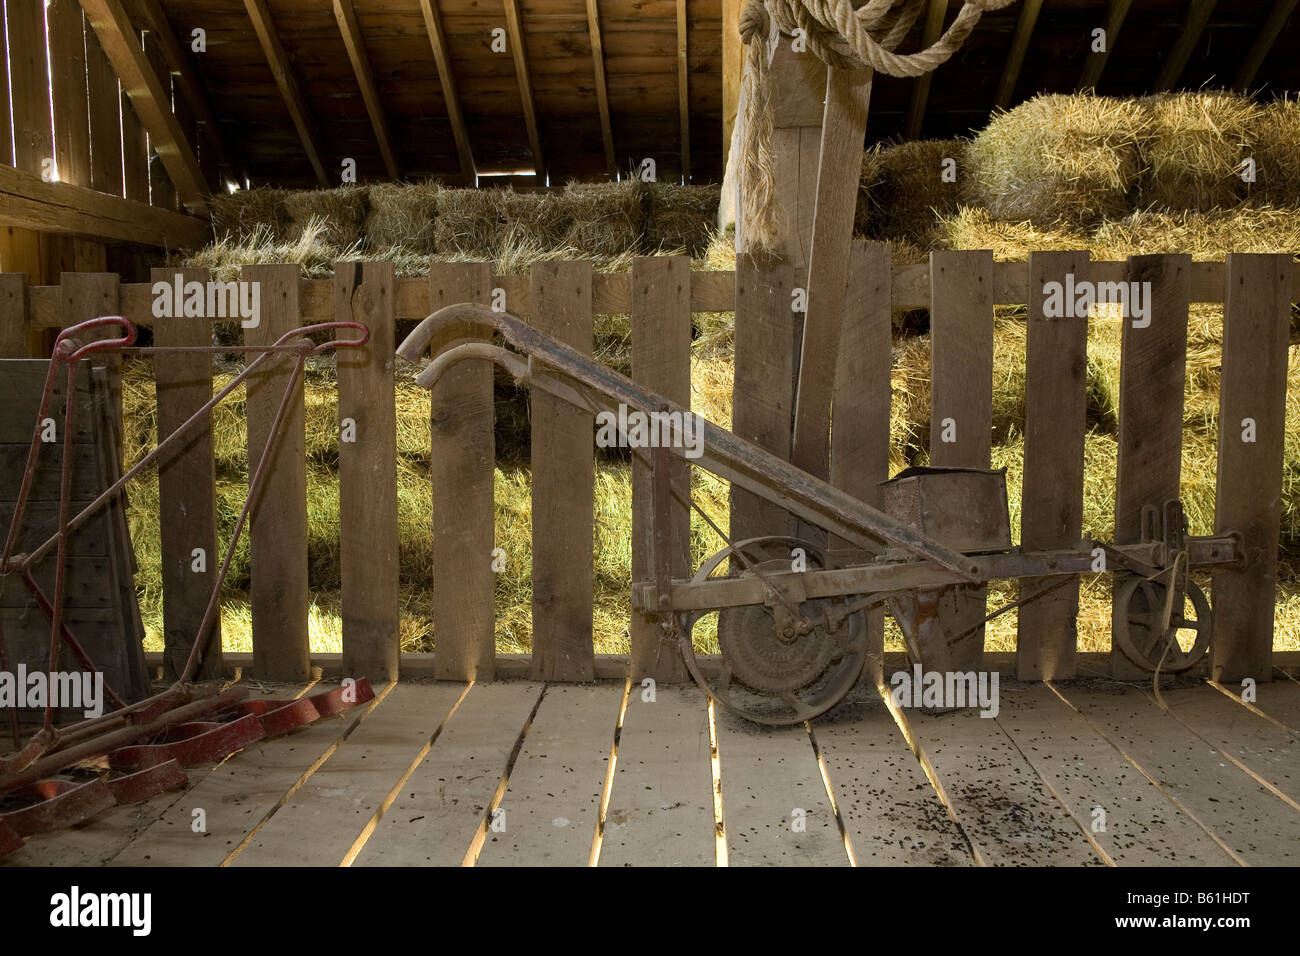 Old farm implements in store in a barn in a city park. Stock Photo